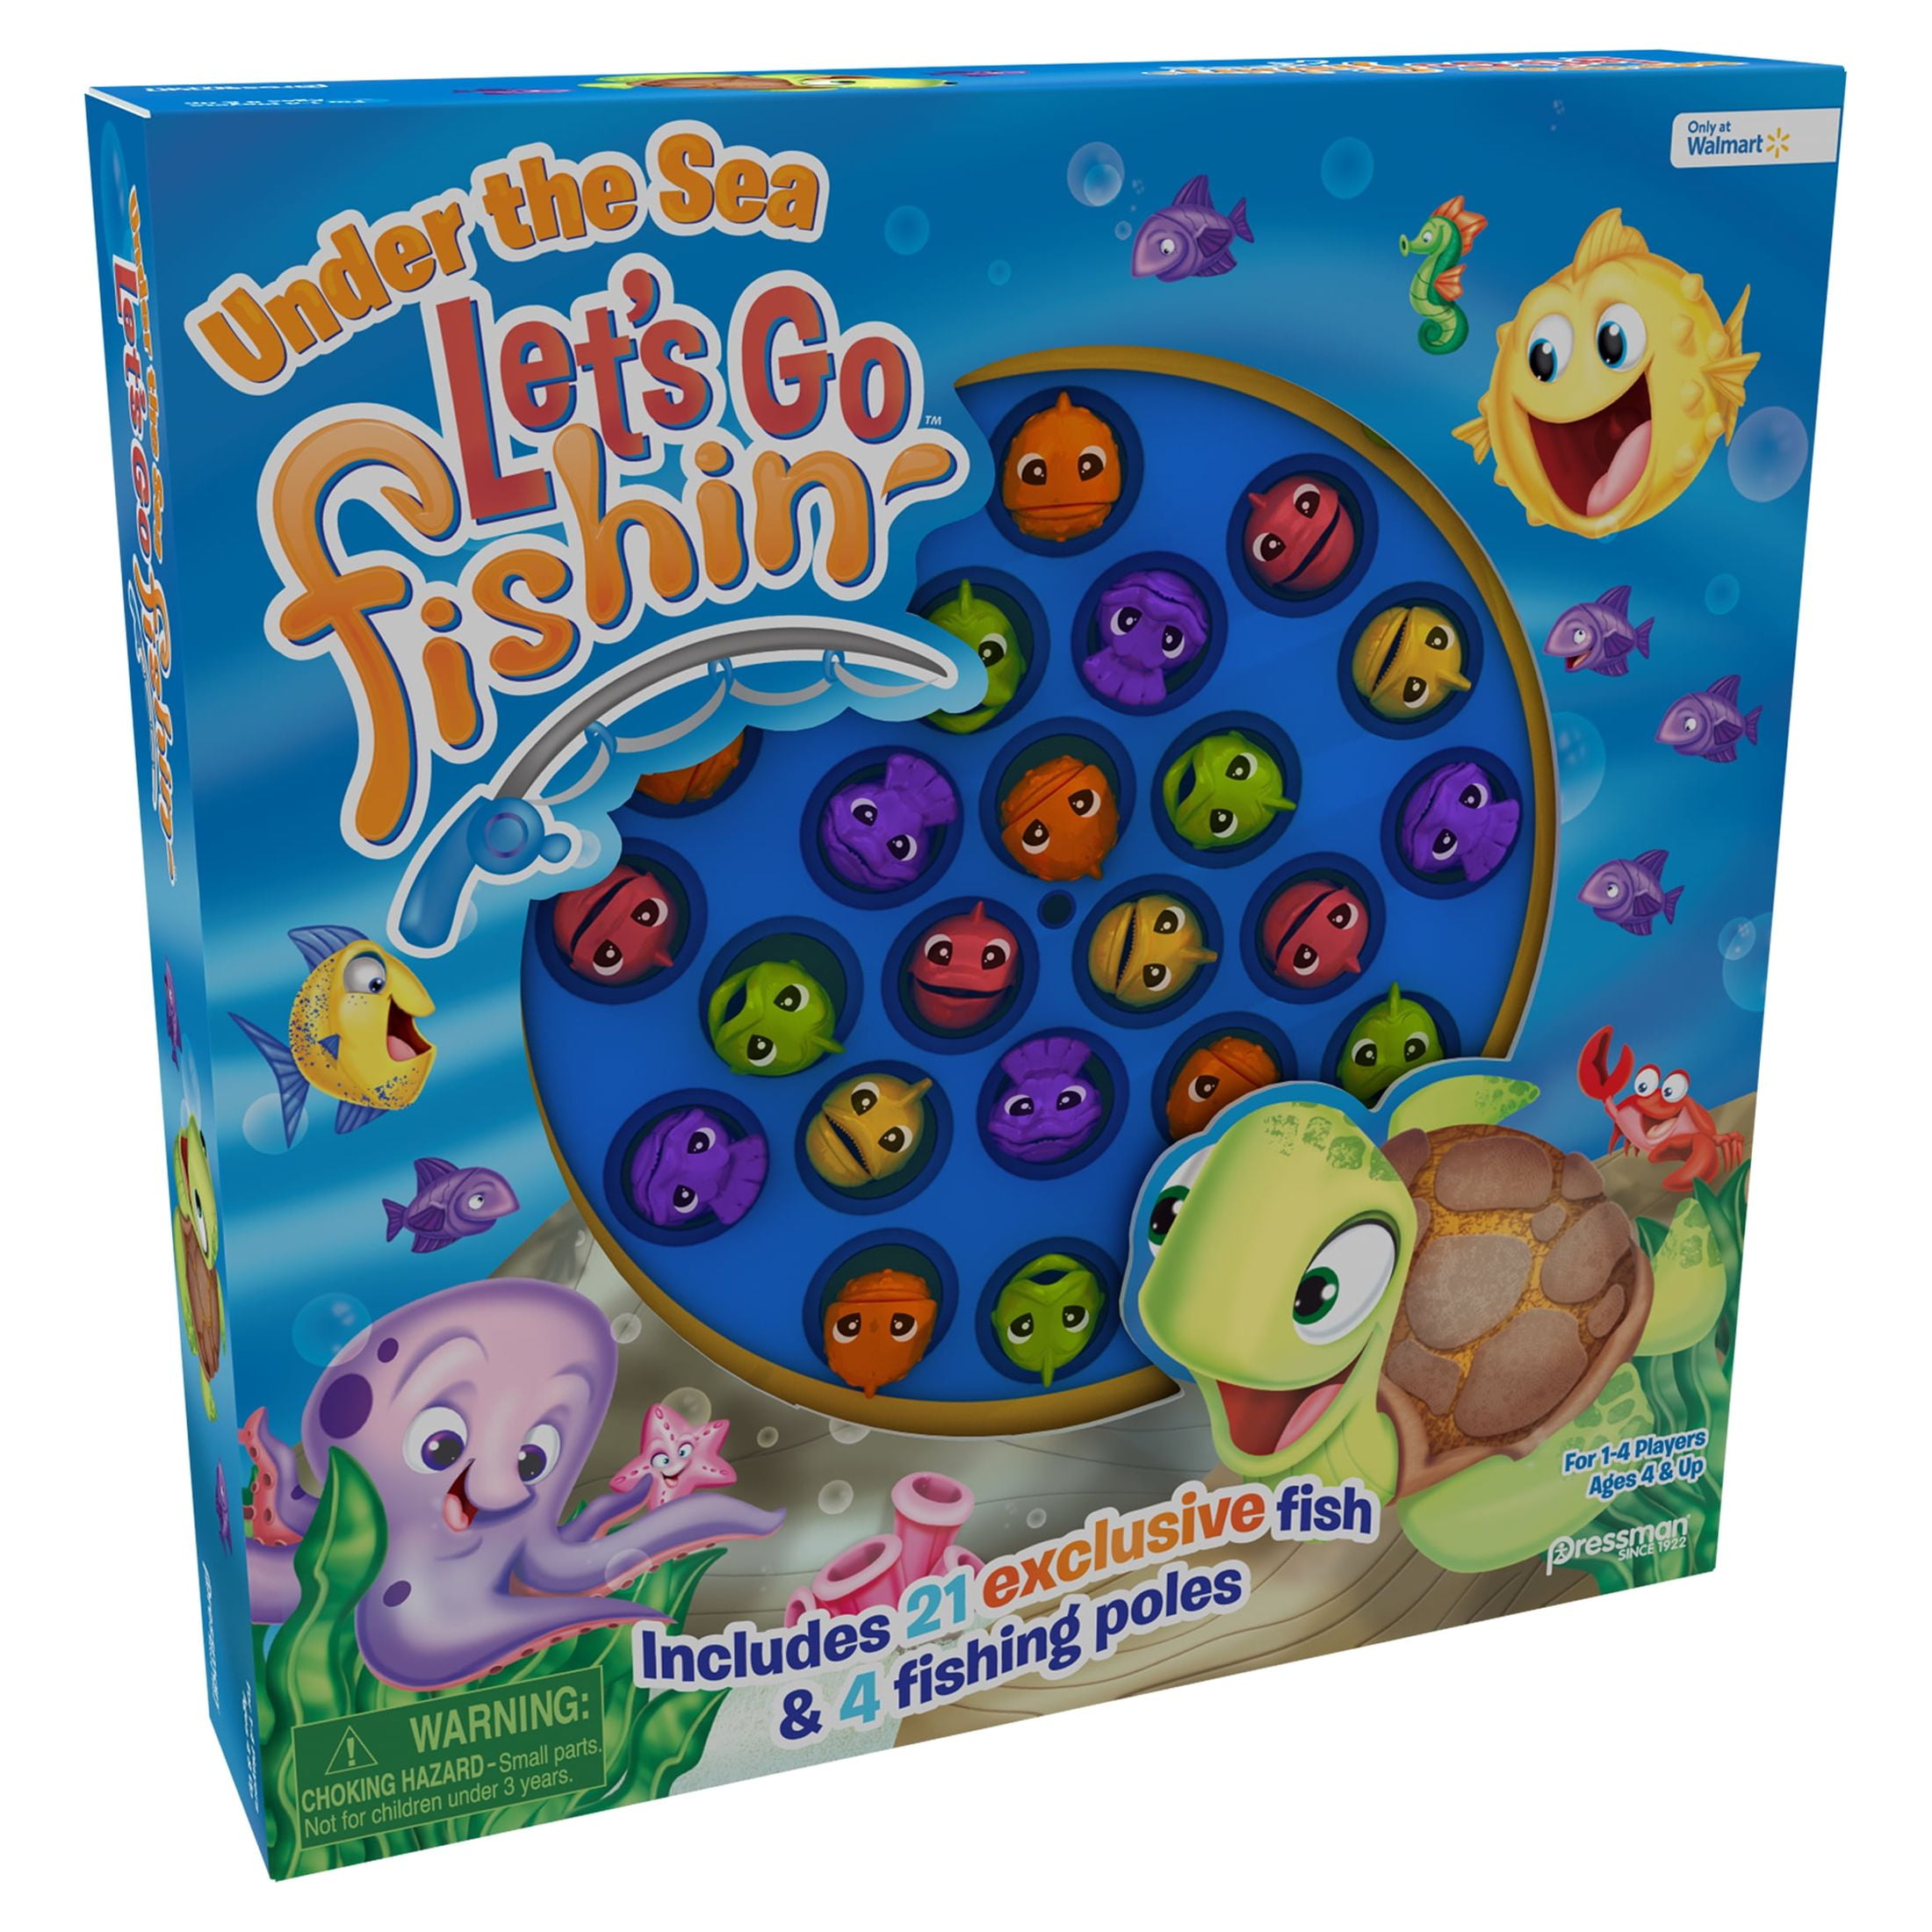 Let's Go Fishin' Deep Sea Replacement Parts Game Pick Fish / Fishing Poles  